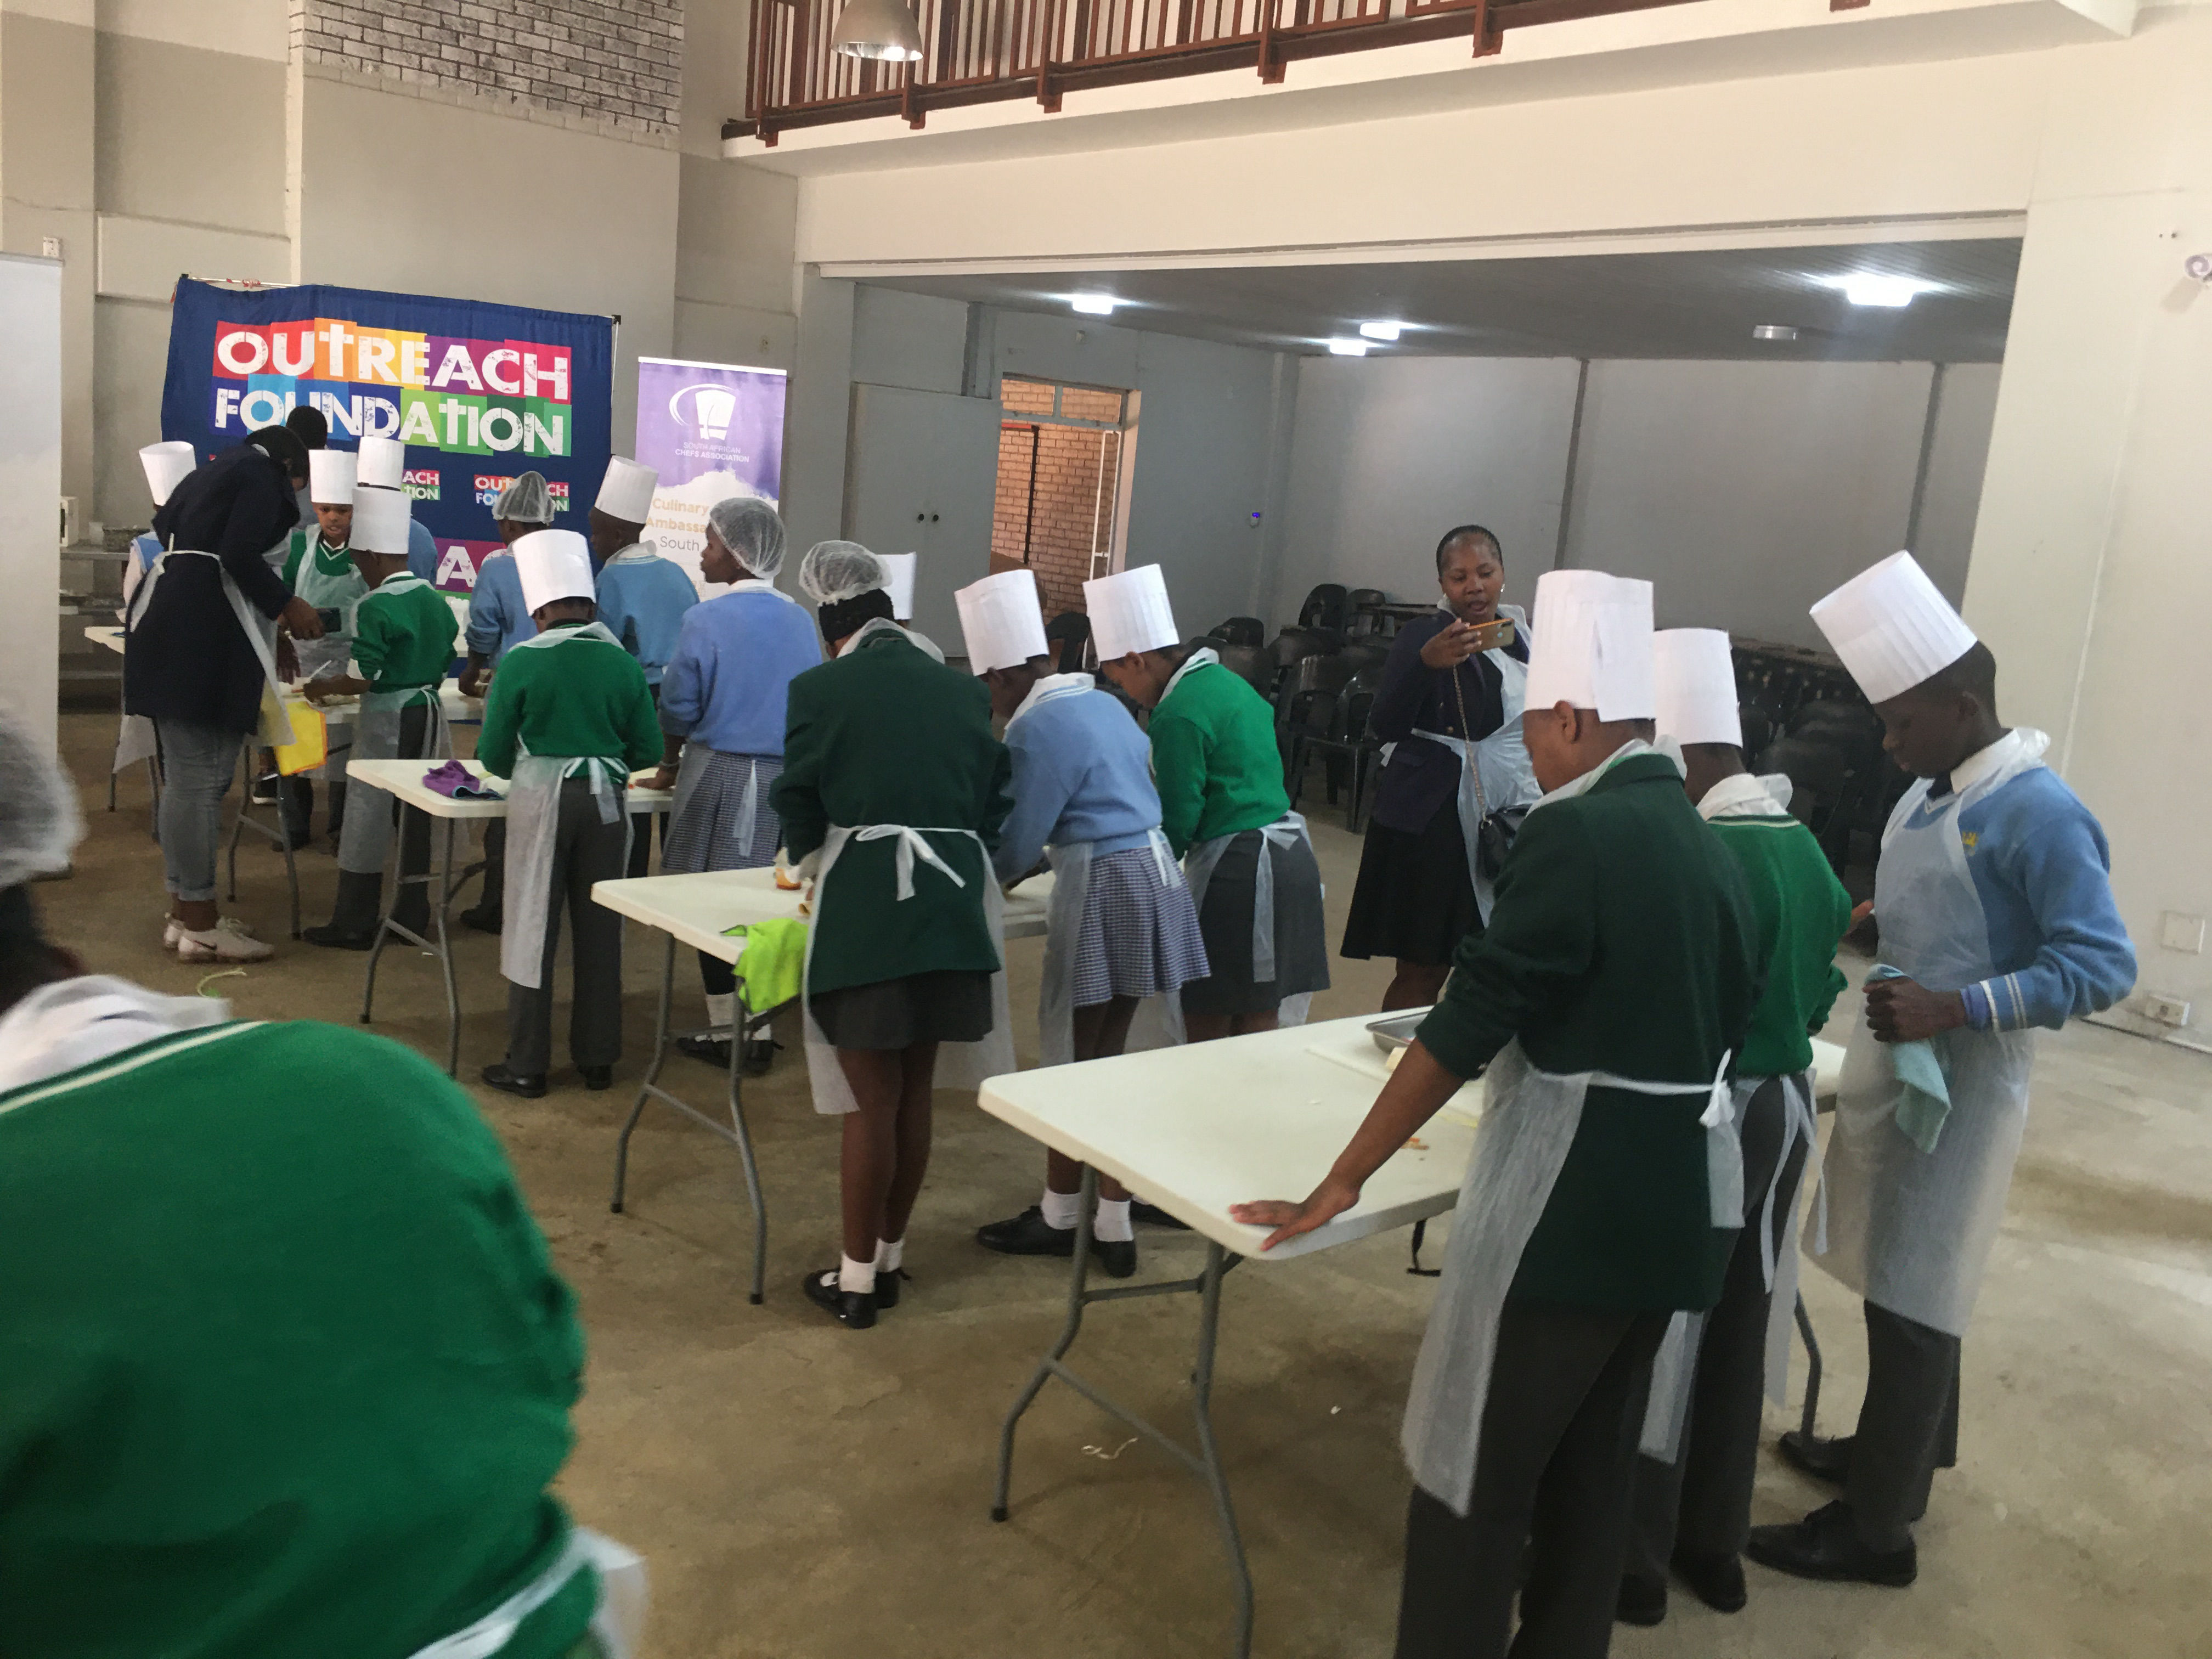 Learners from schools in Johannesburg attended a cooking class at Outreach Foundation on International Chef's Day